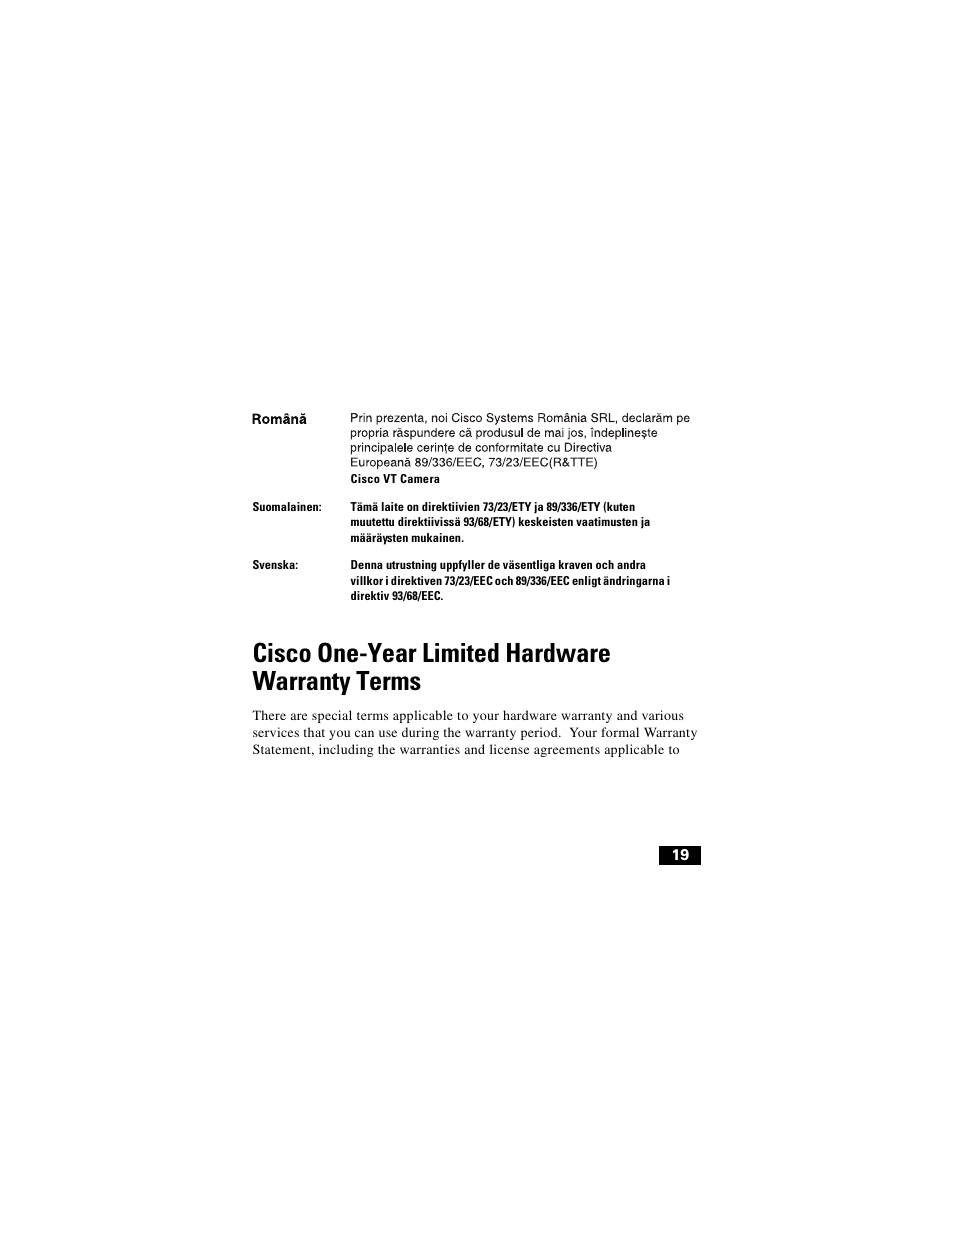 Cisco one-year limited hardware warranty terms | Cisco Digital Camera User Manual | Page 19 / 22